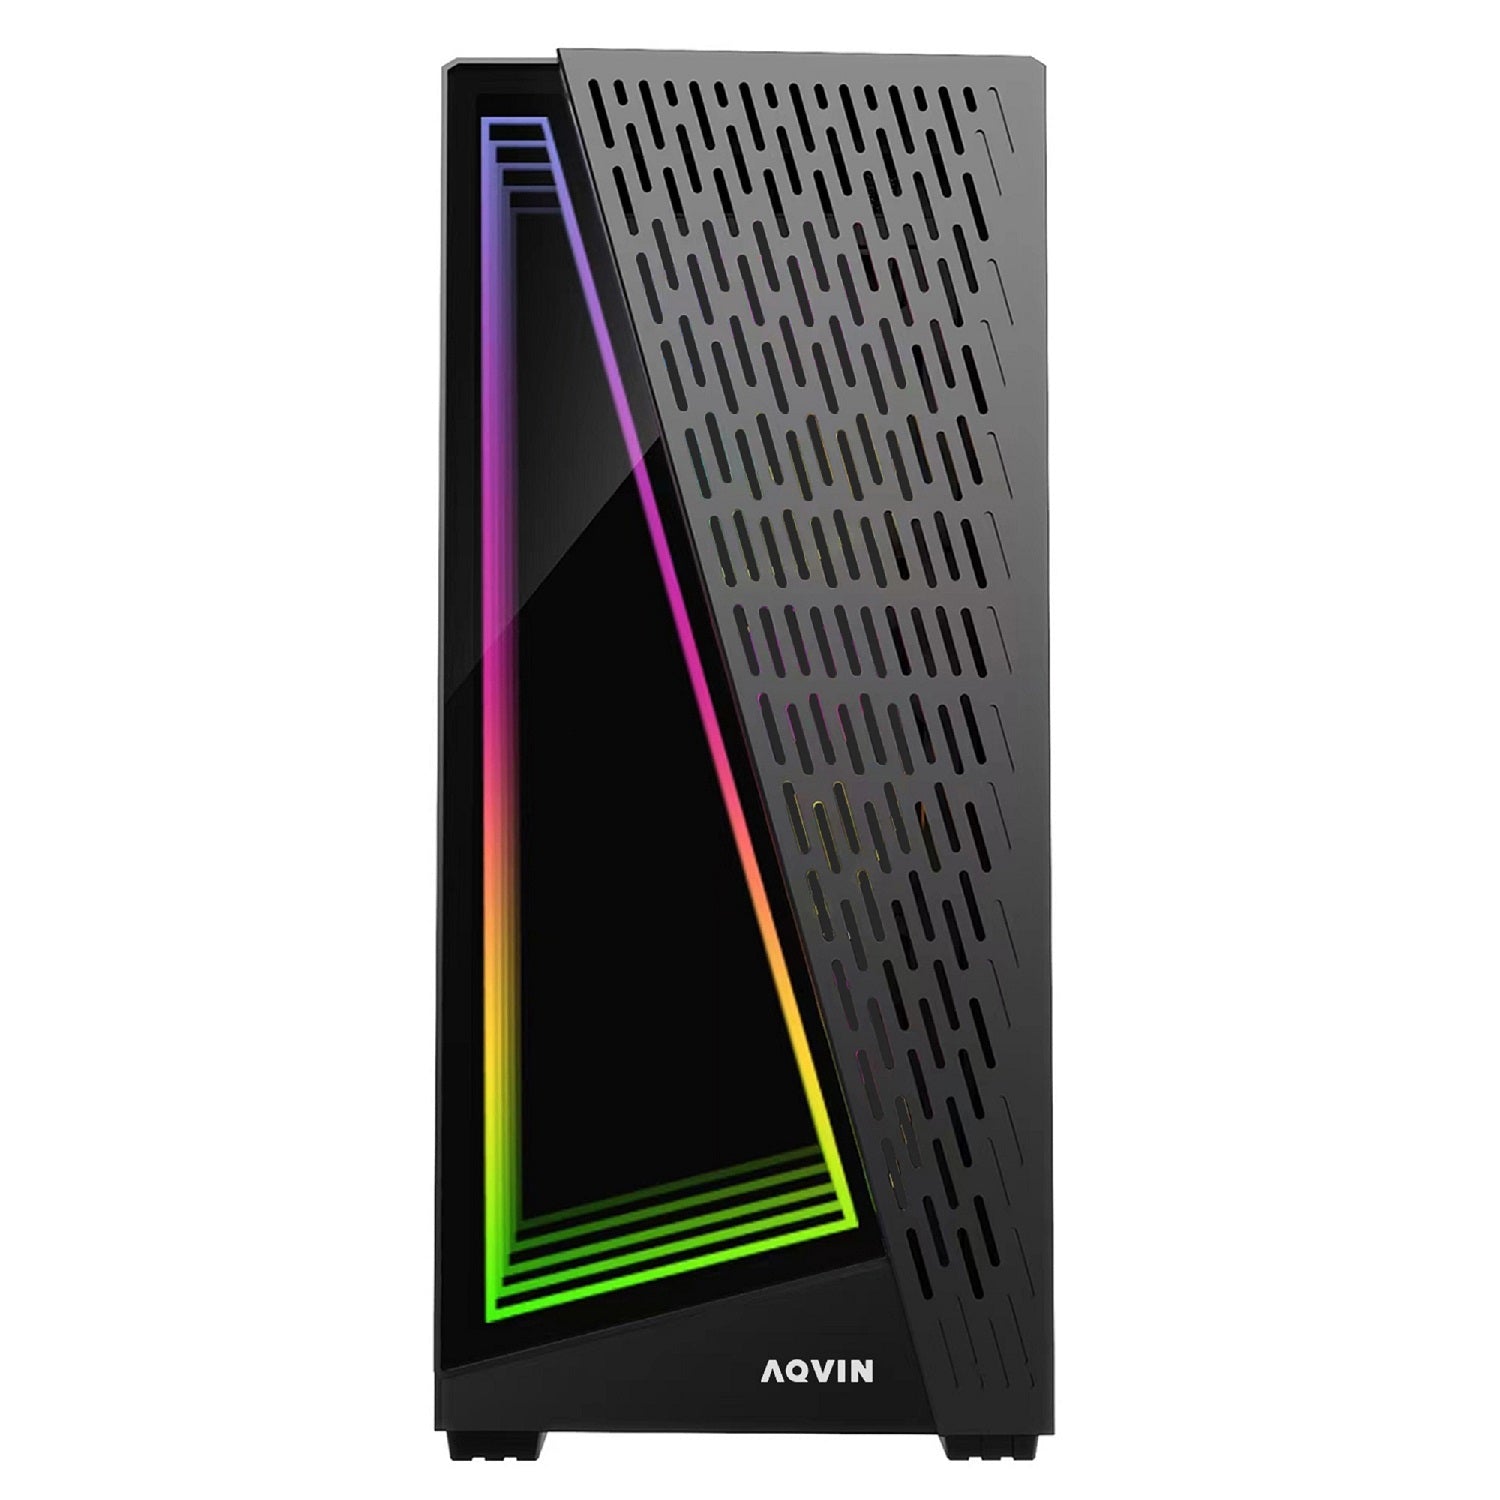 AQVIN Gaming PC Desktop Computer Tower, Intel Core i7 up to 4.00 GHz, 32GB DDR4 RAM, 1TB - 2TB SSD, RX 580, GTX 1660s, RTX 3050, RTX 3060, Windows 10 Pro, WIFI - RGB Keyboard and Mouse